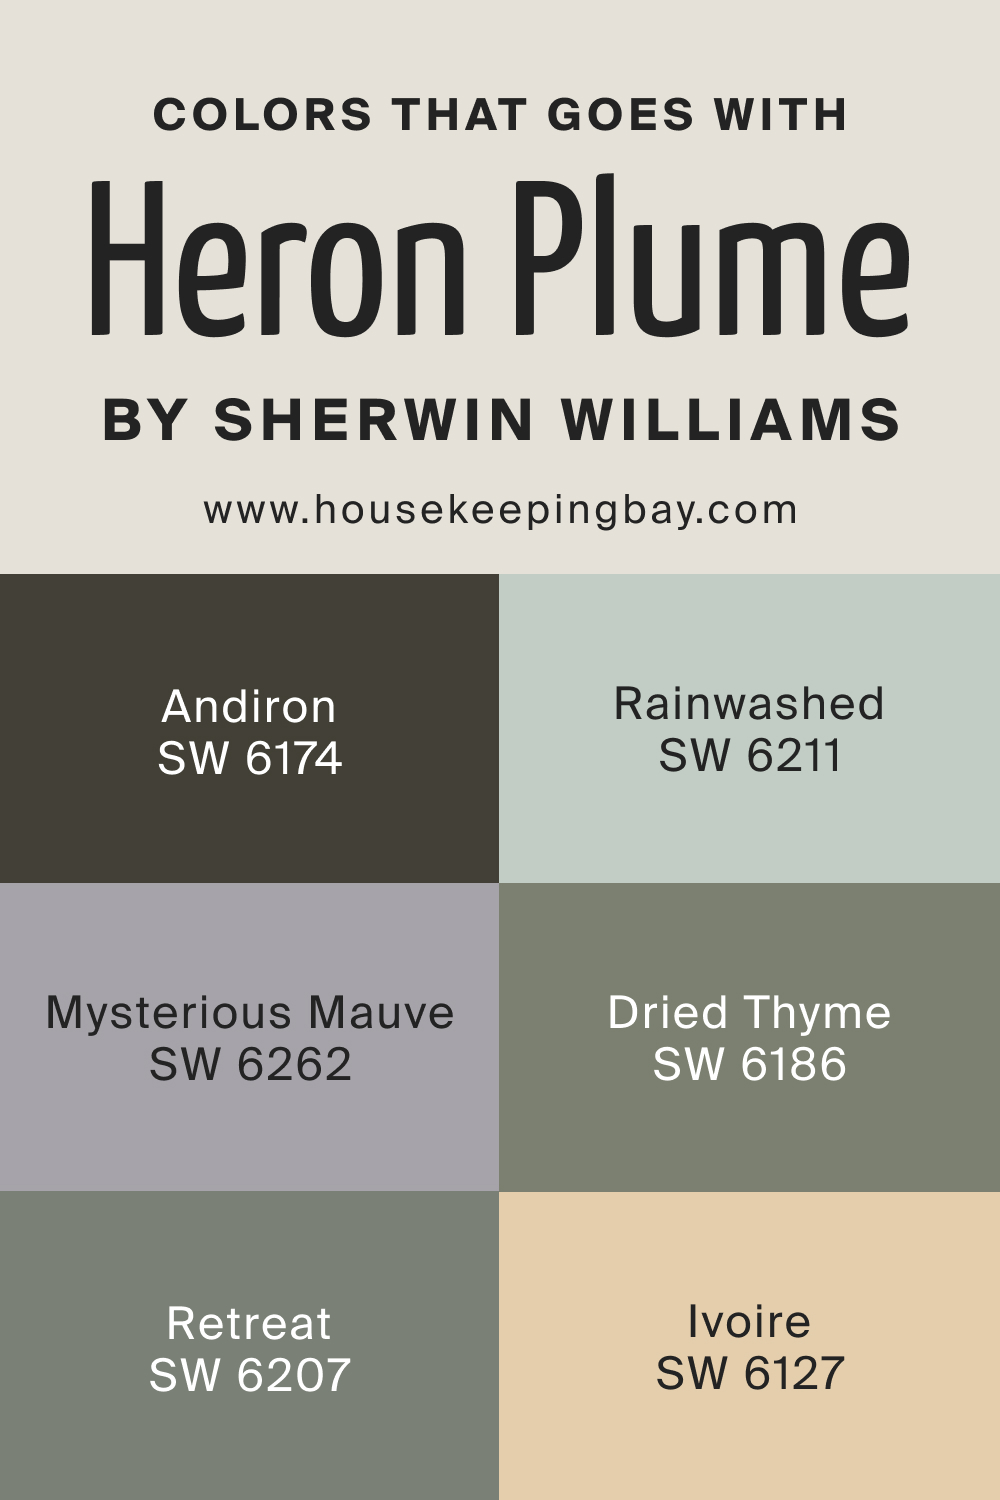 Colors that goes with SW Heron Plume by Sherwin Williams